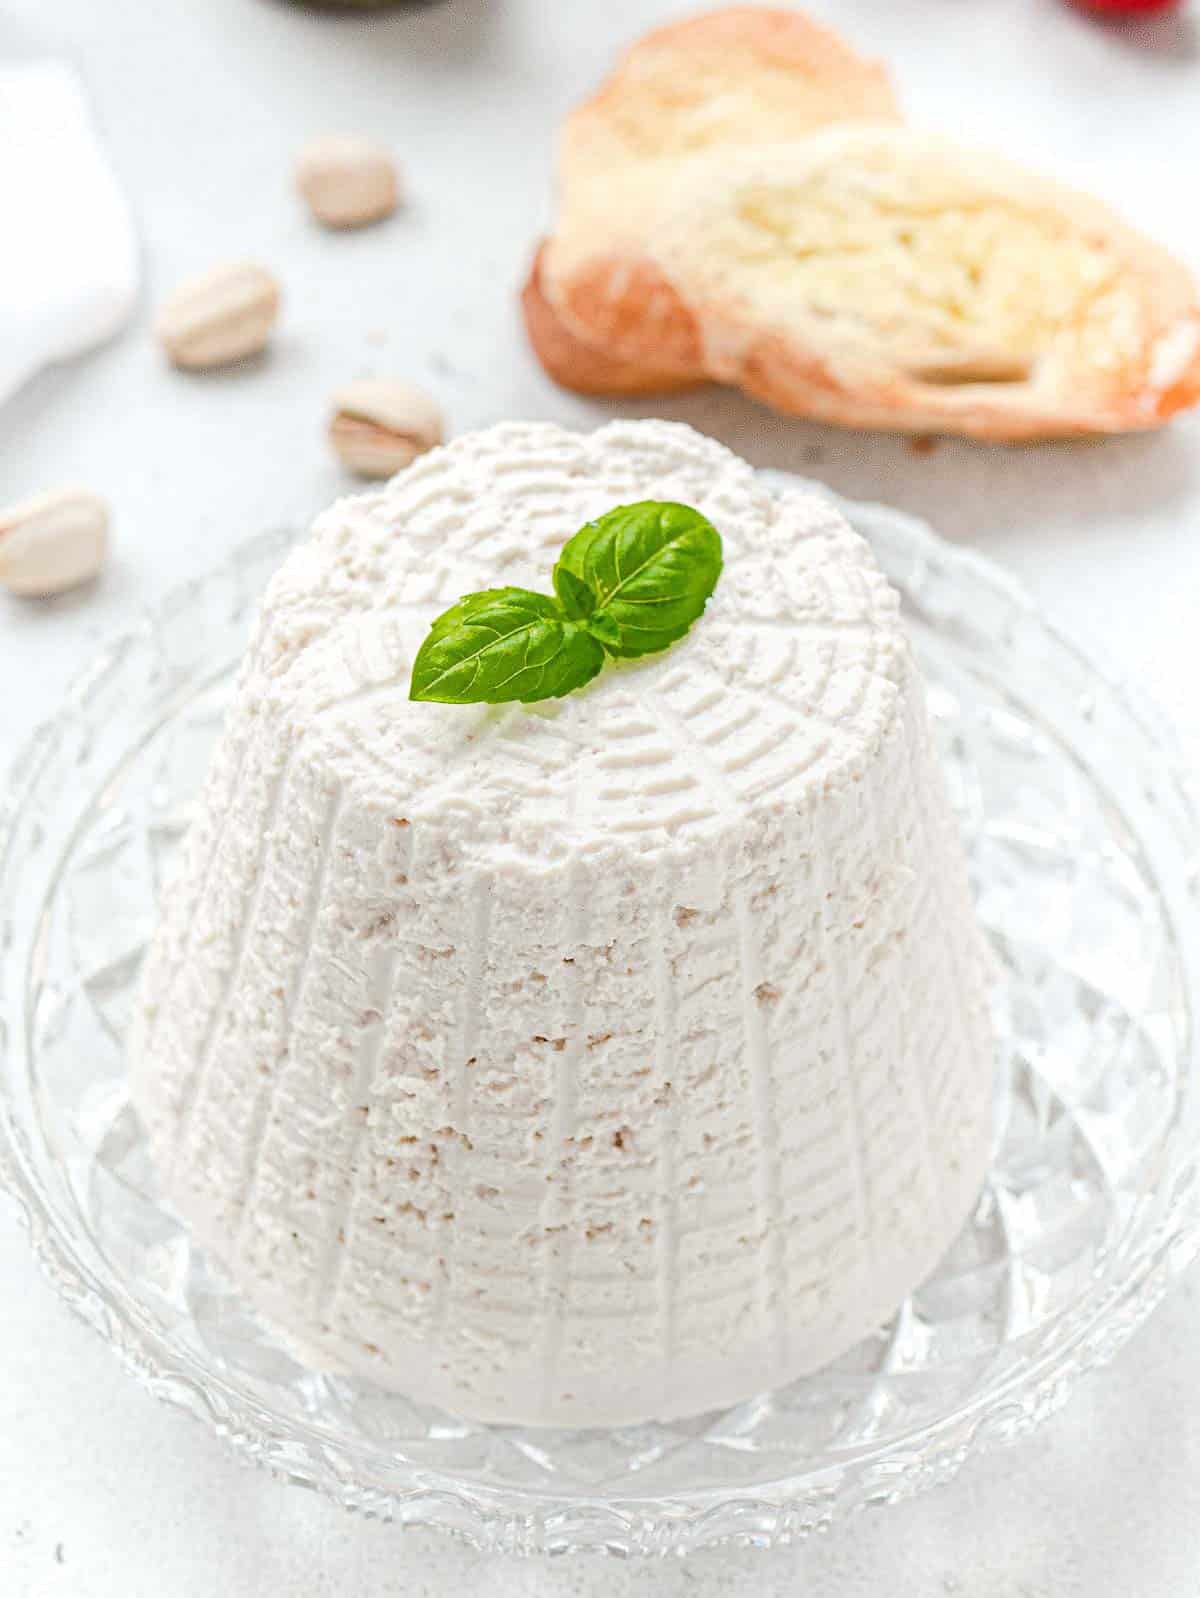 vegan ricotta cheese ready to be served with basil on top and slices of bread on the side.